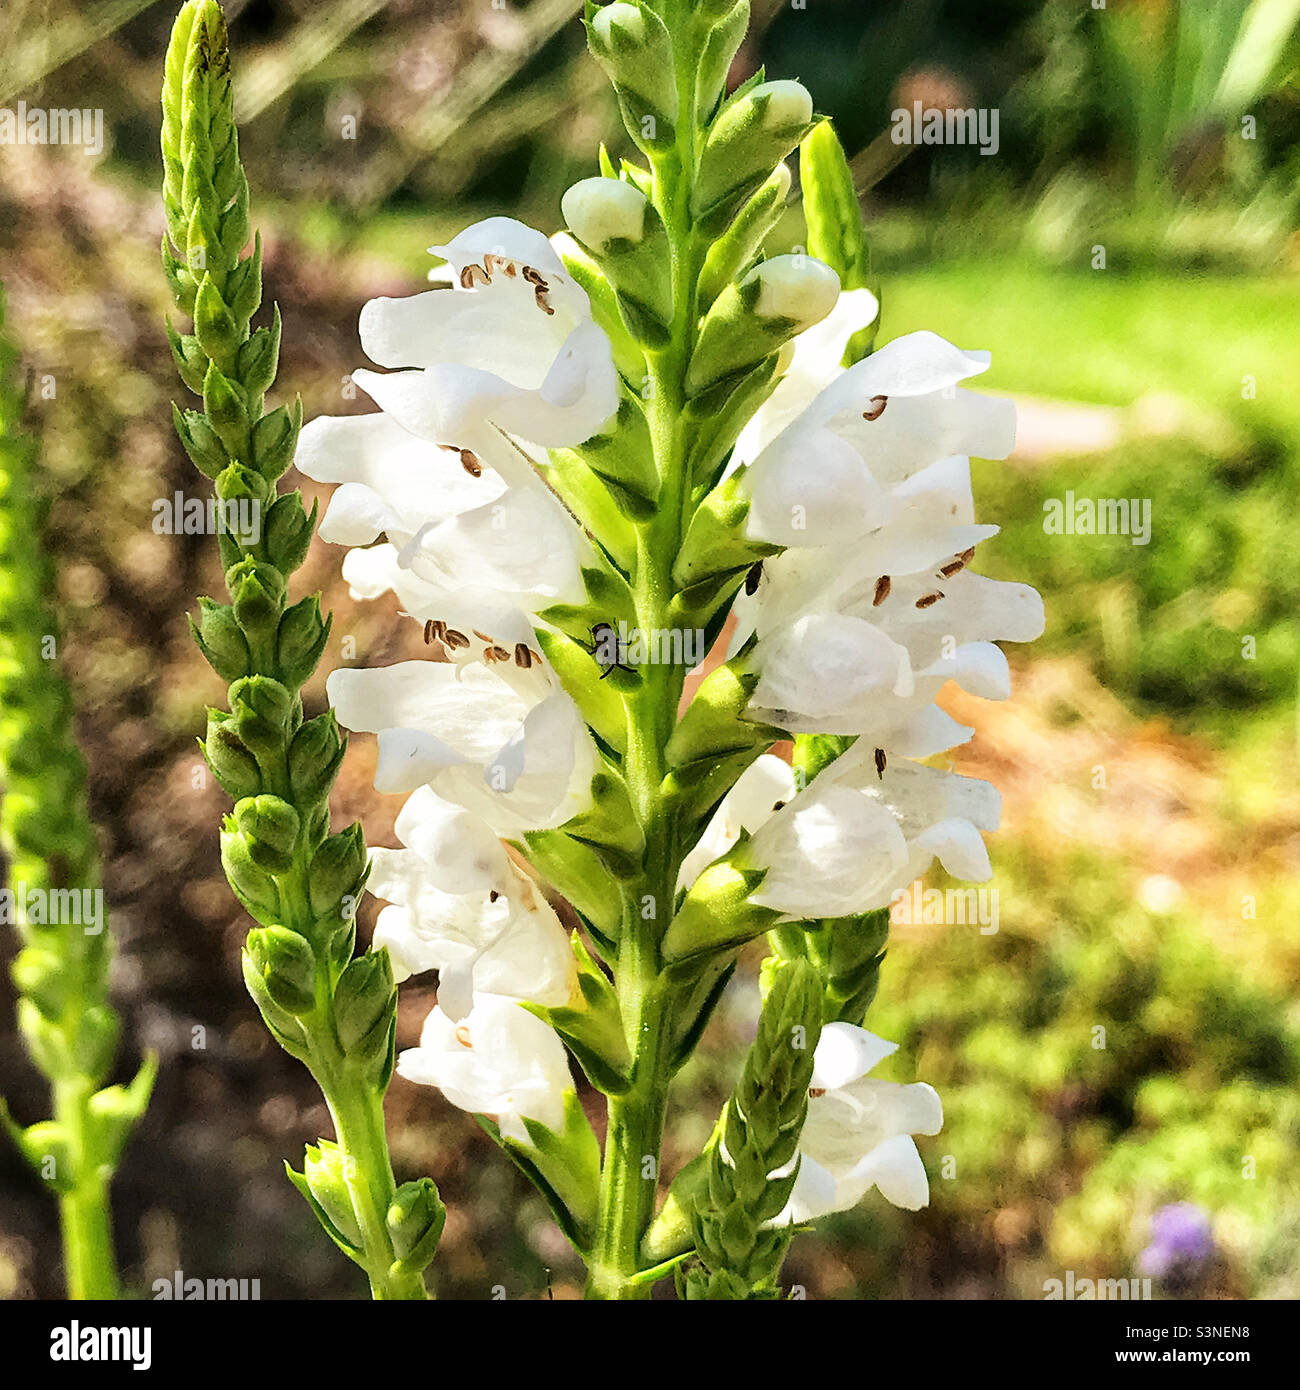 Obedient plant with white showy flower blossoms. Stock Photo